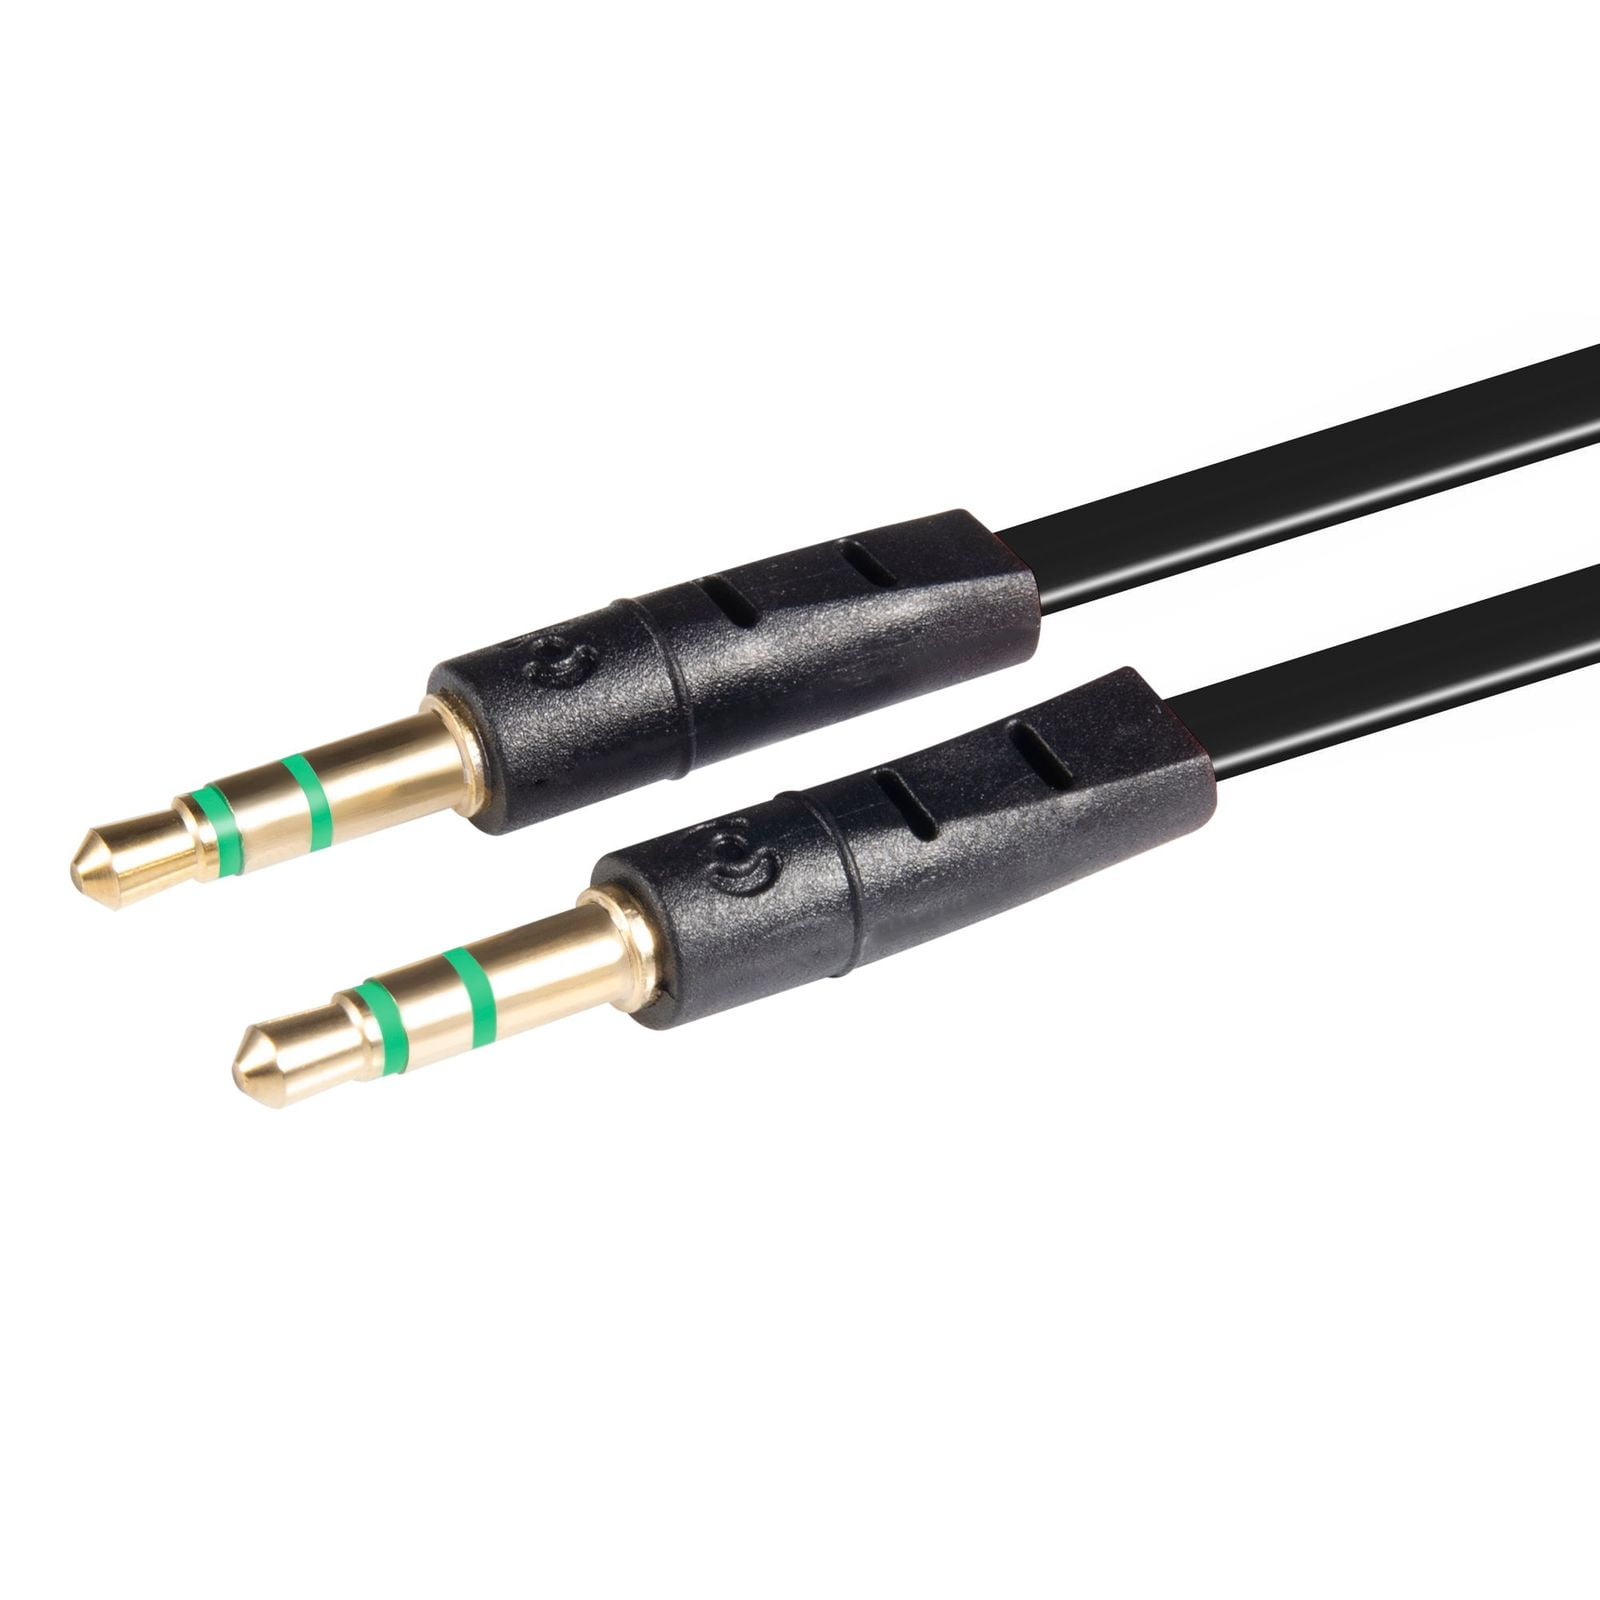 NEW 3.5mm STEREO PLUG MALE TO MALE EXTENSION CABLE AUDIO 1.5M FAST SHIPPING 